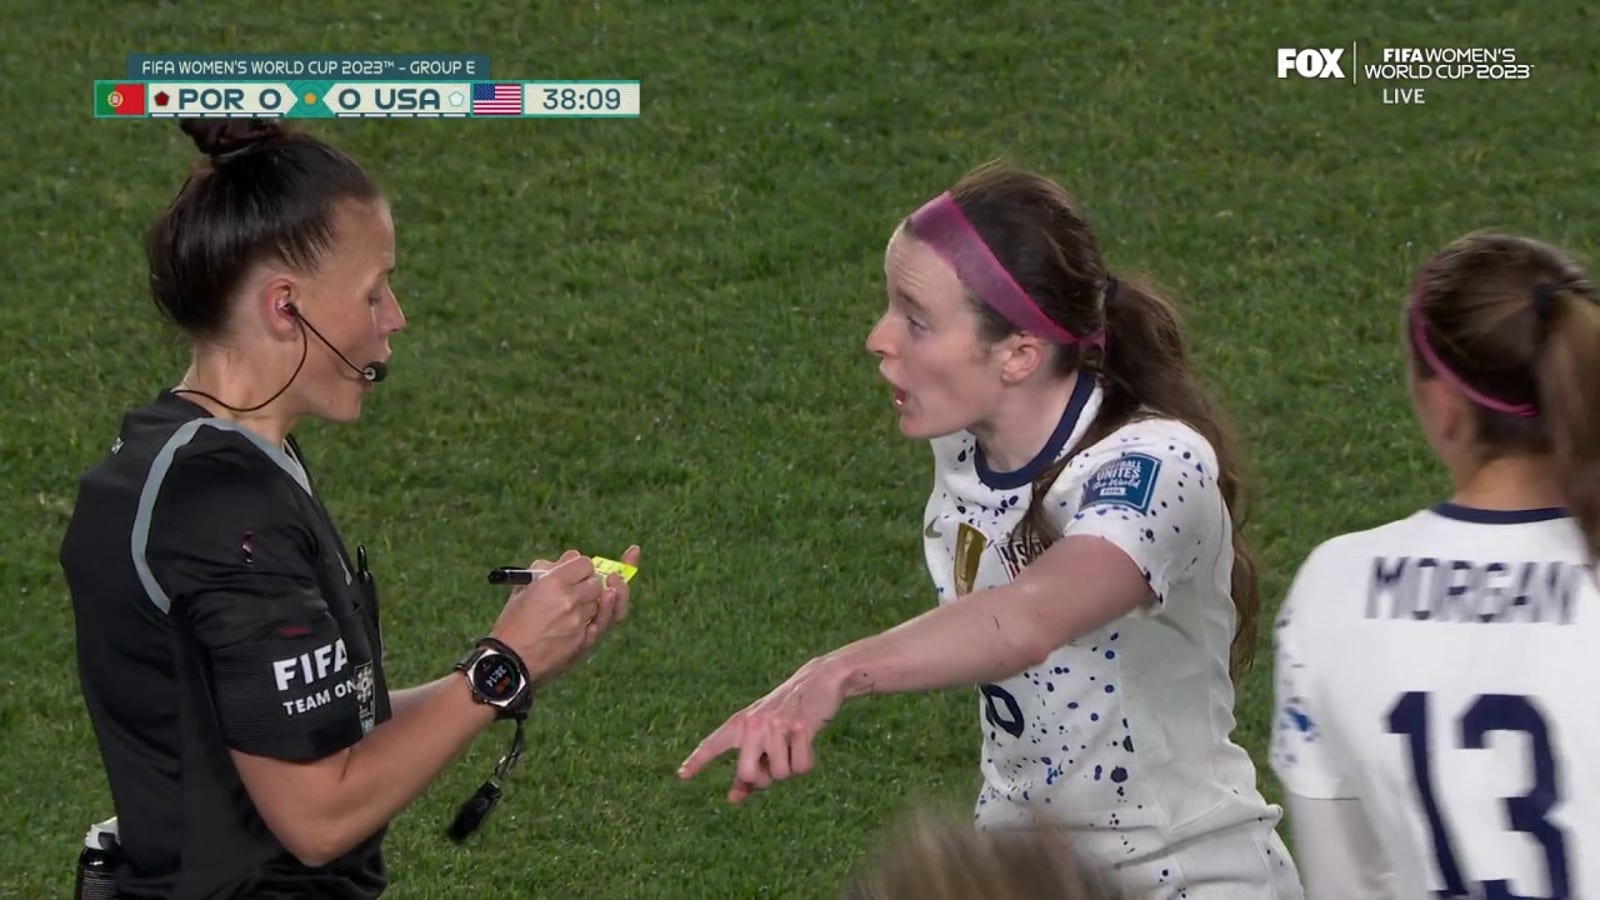 Rose Lavelle receives a yellow card and is out for the USA's next game 